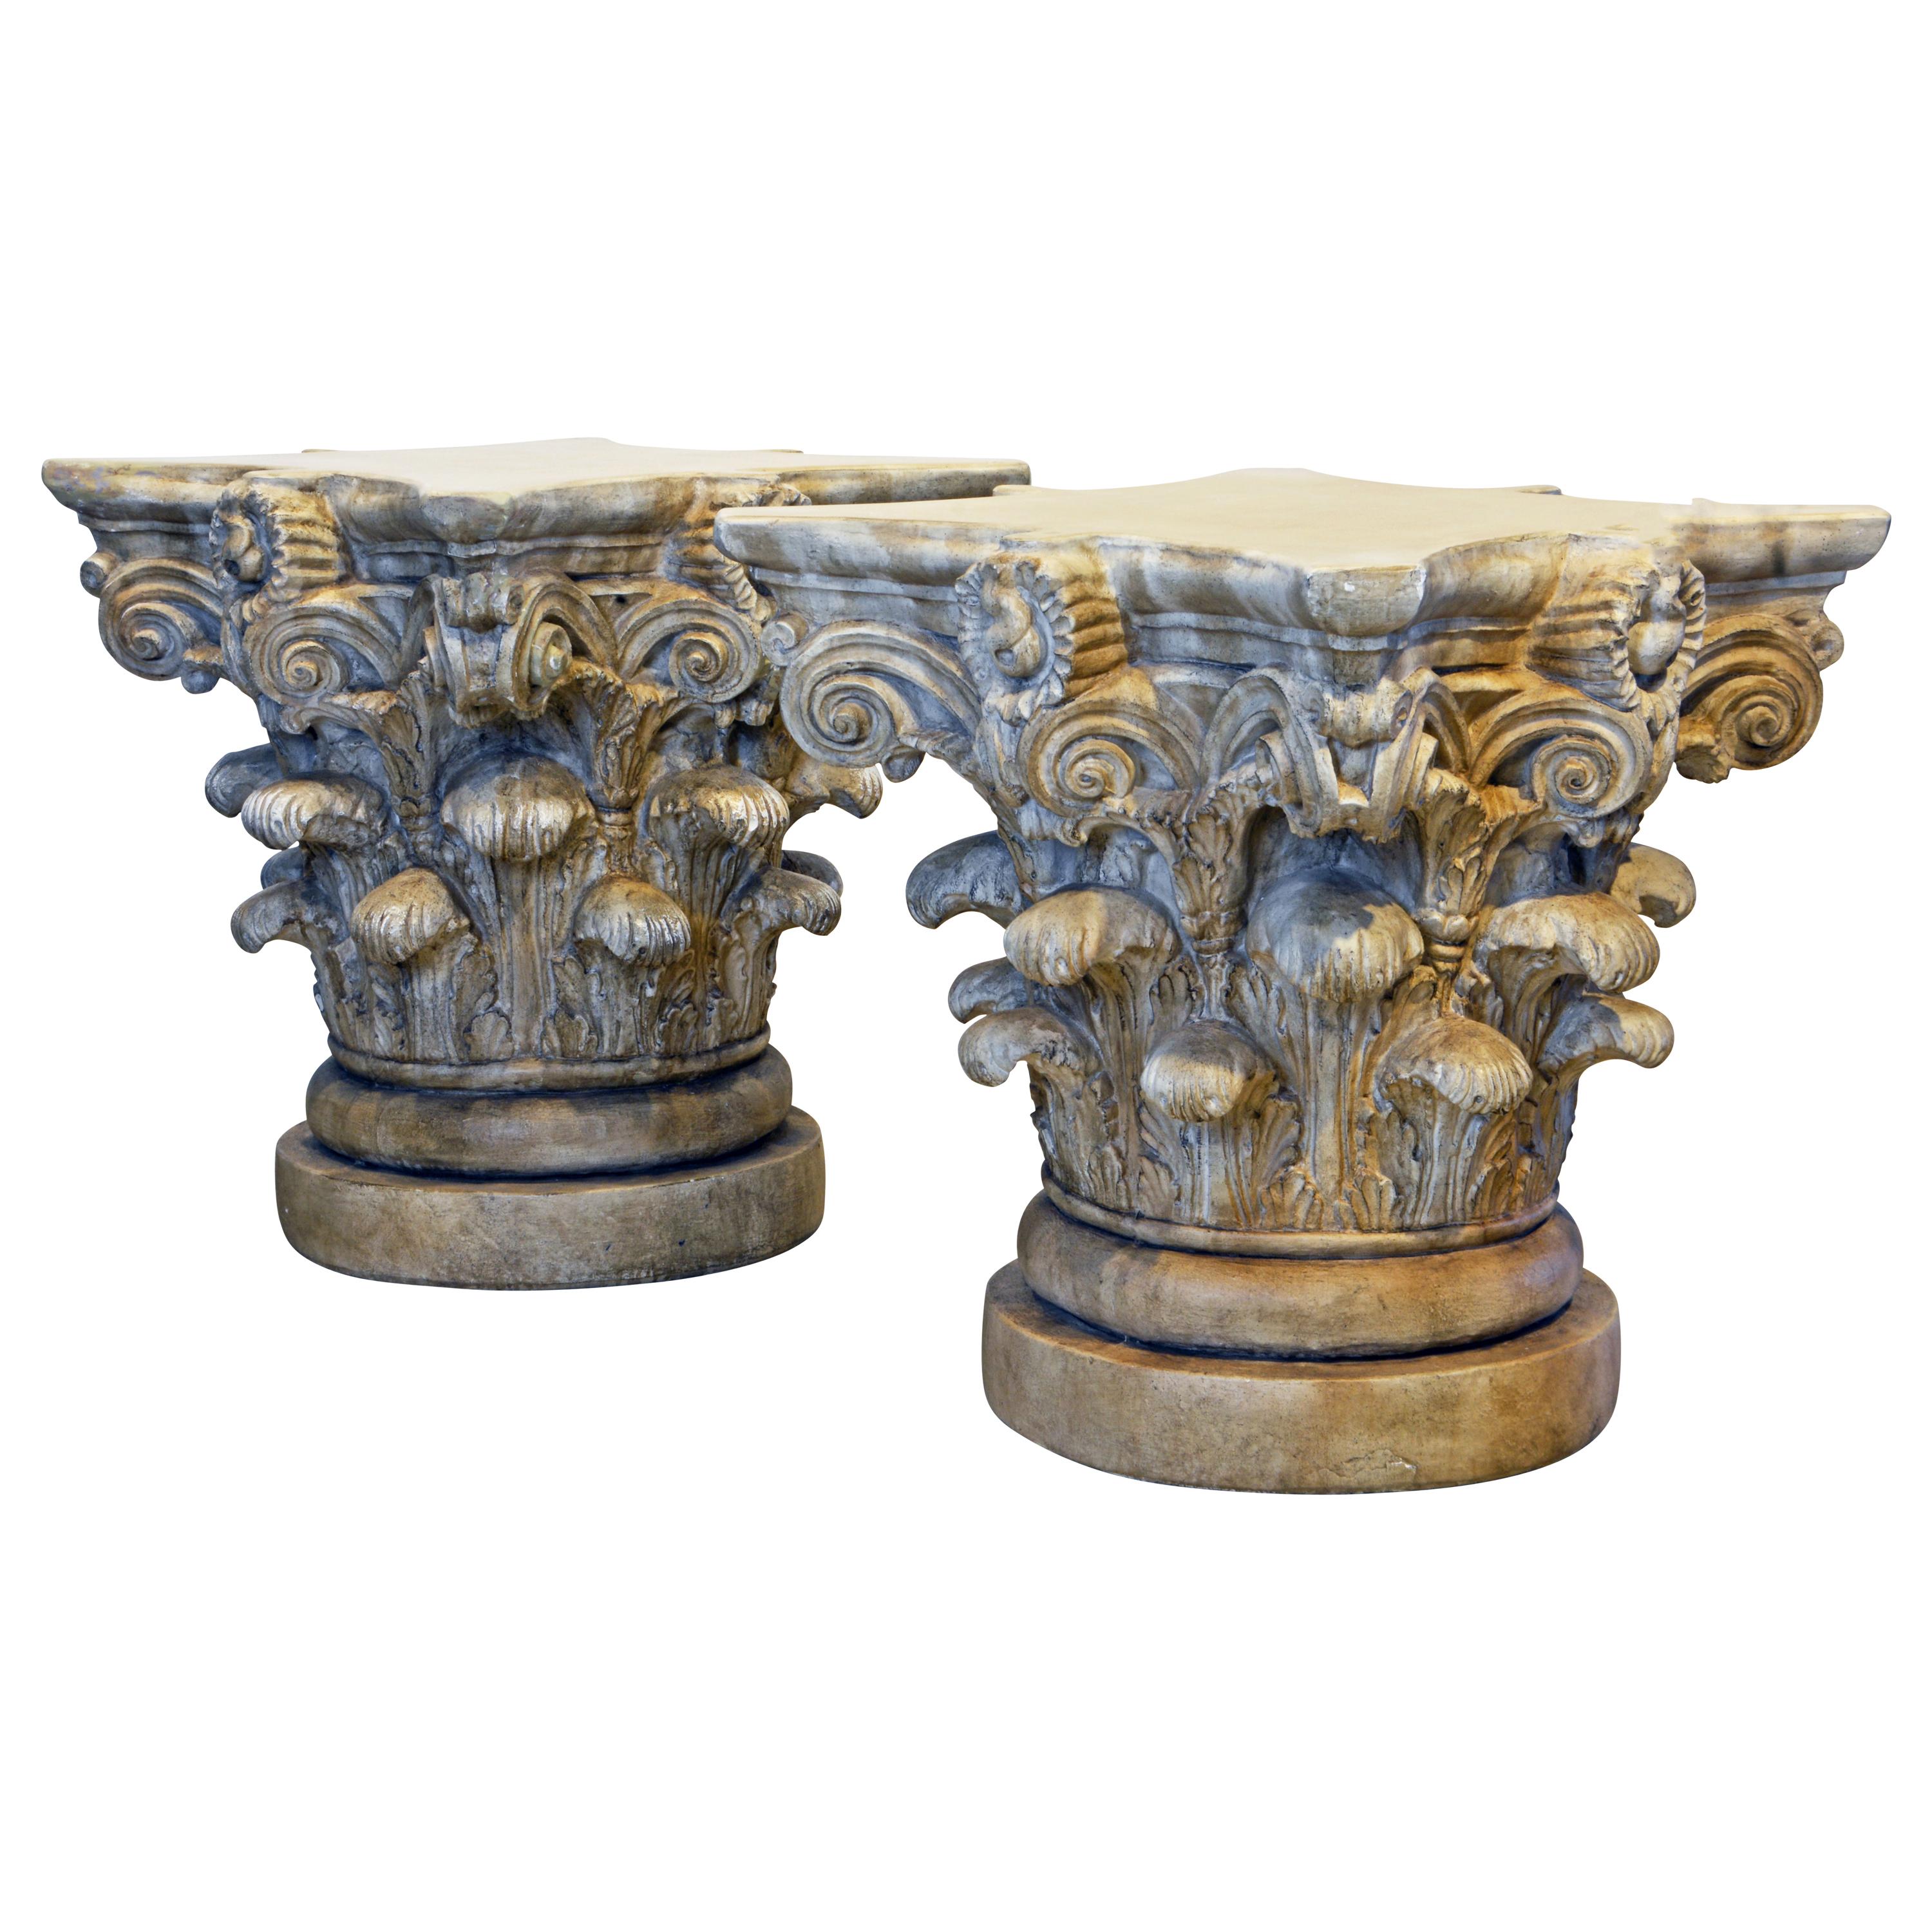 Pair of Corinthian Plaster Capitals after The Antique, Table Bases or Sculptures